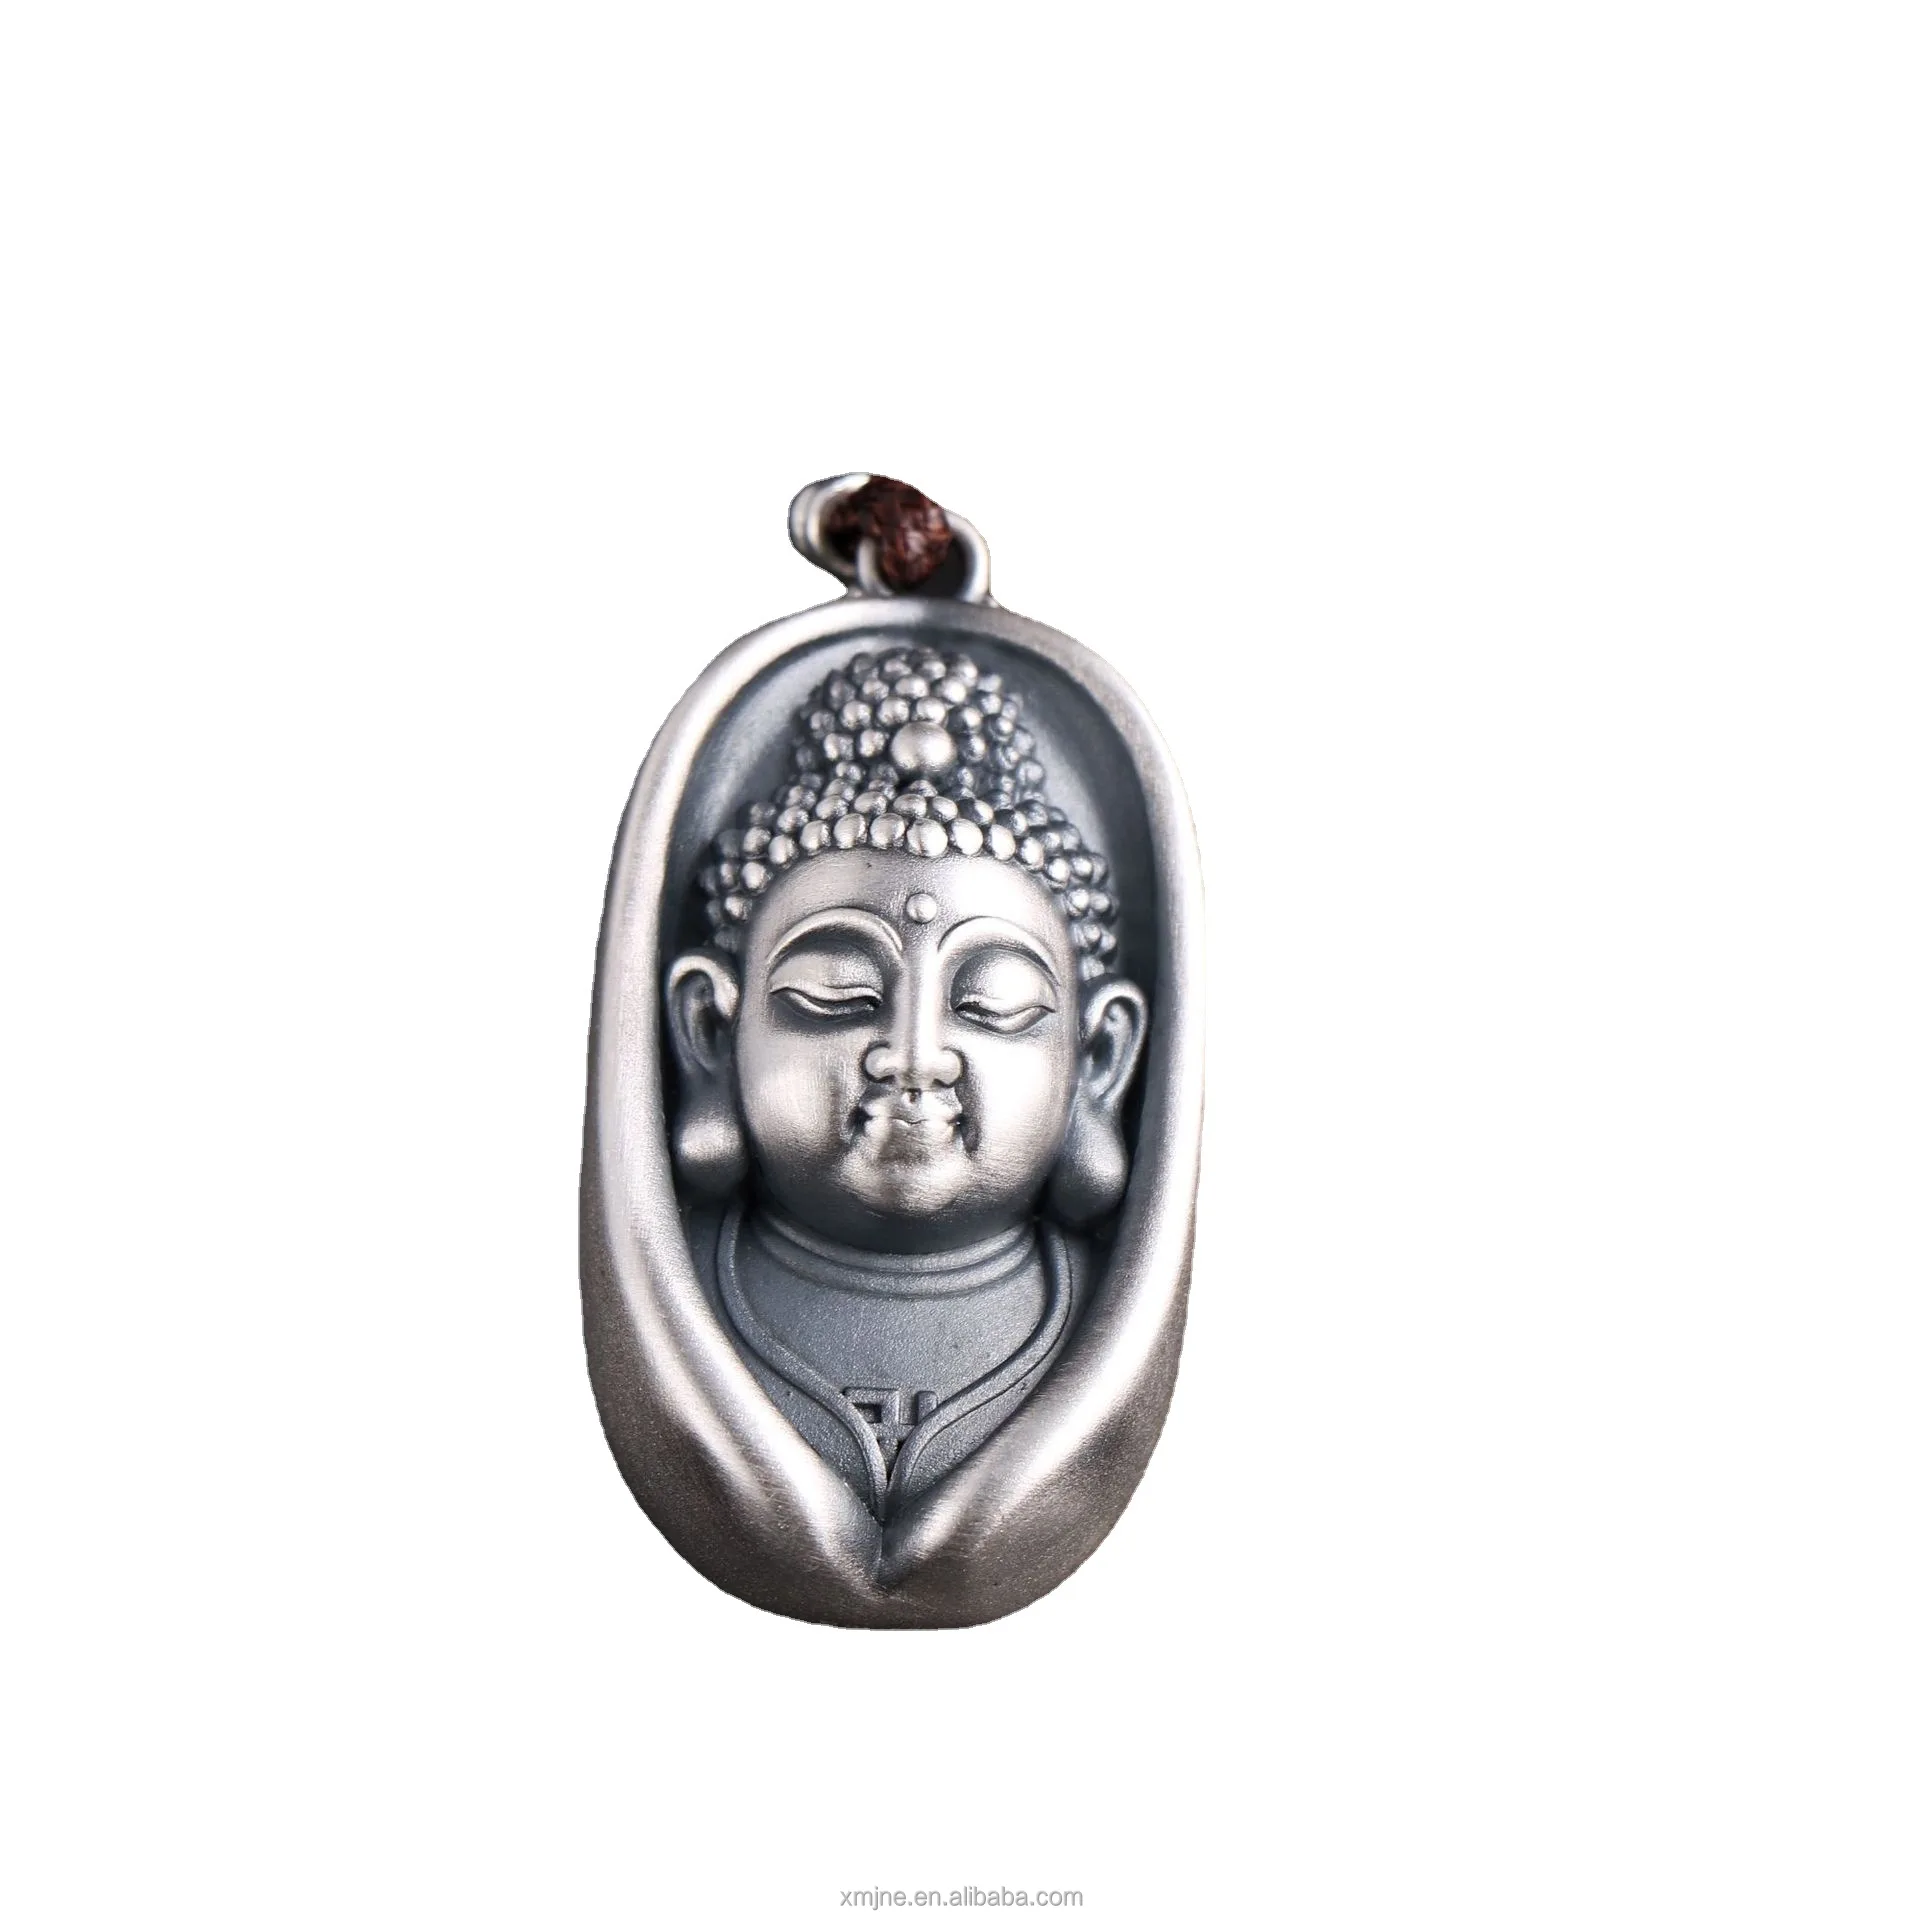 

Certified S999 Vintage Little Buddha Necklace Buddha Statue Silver Head Lotus Sterling Silver Pendant